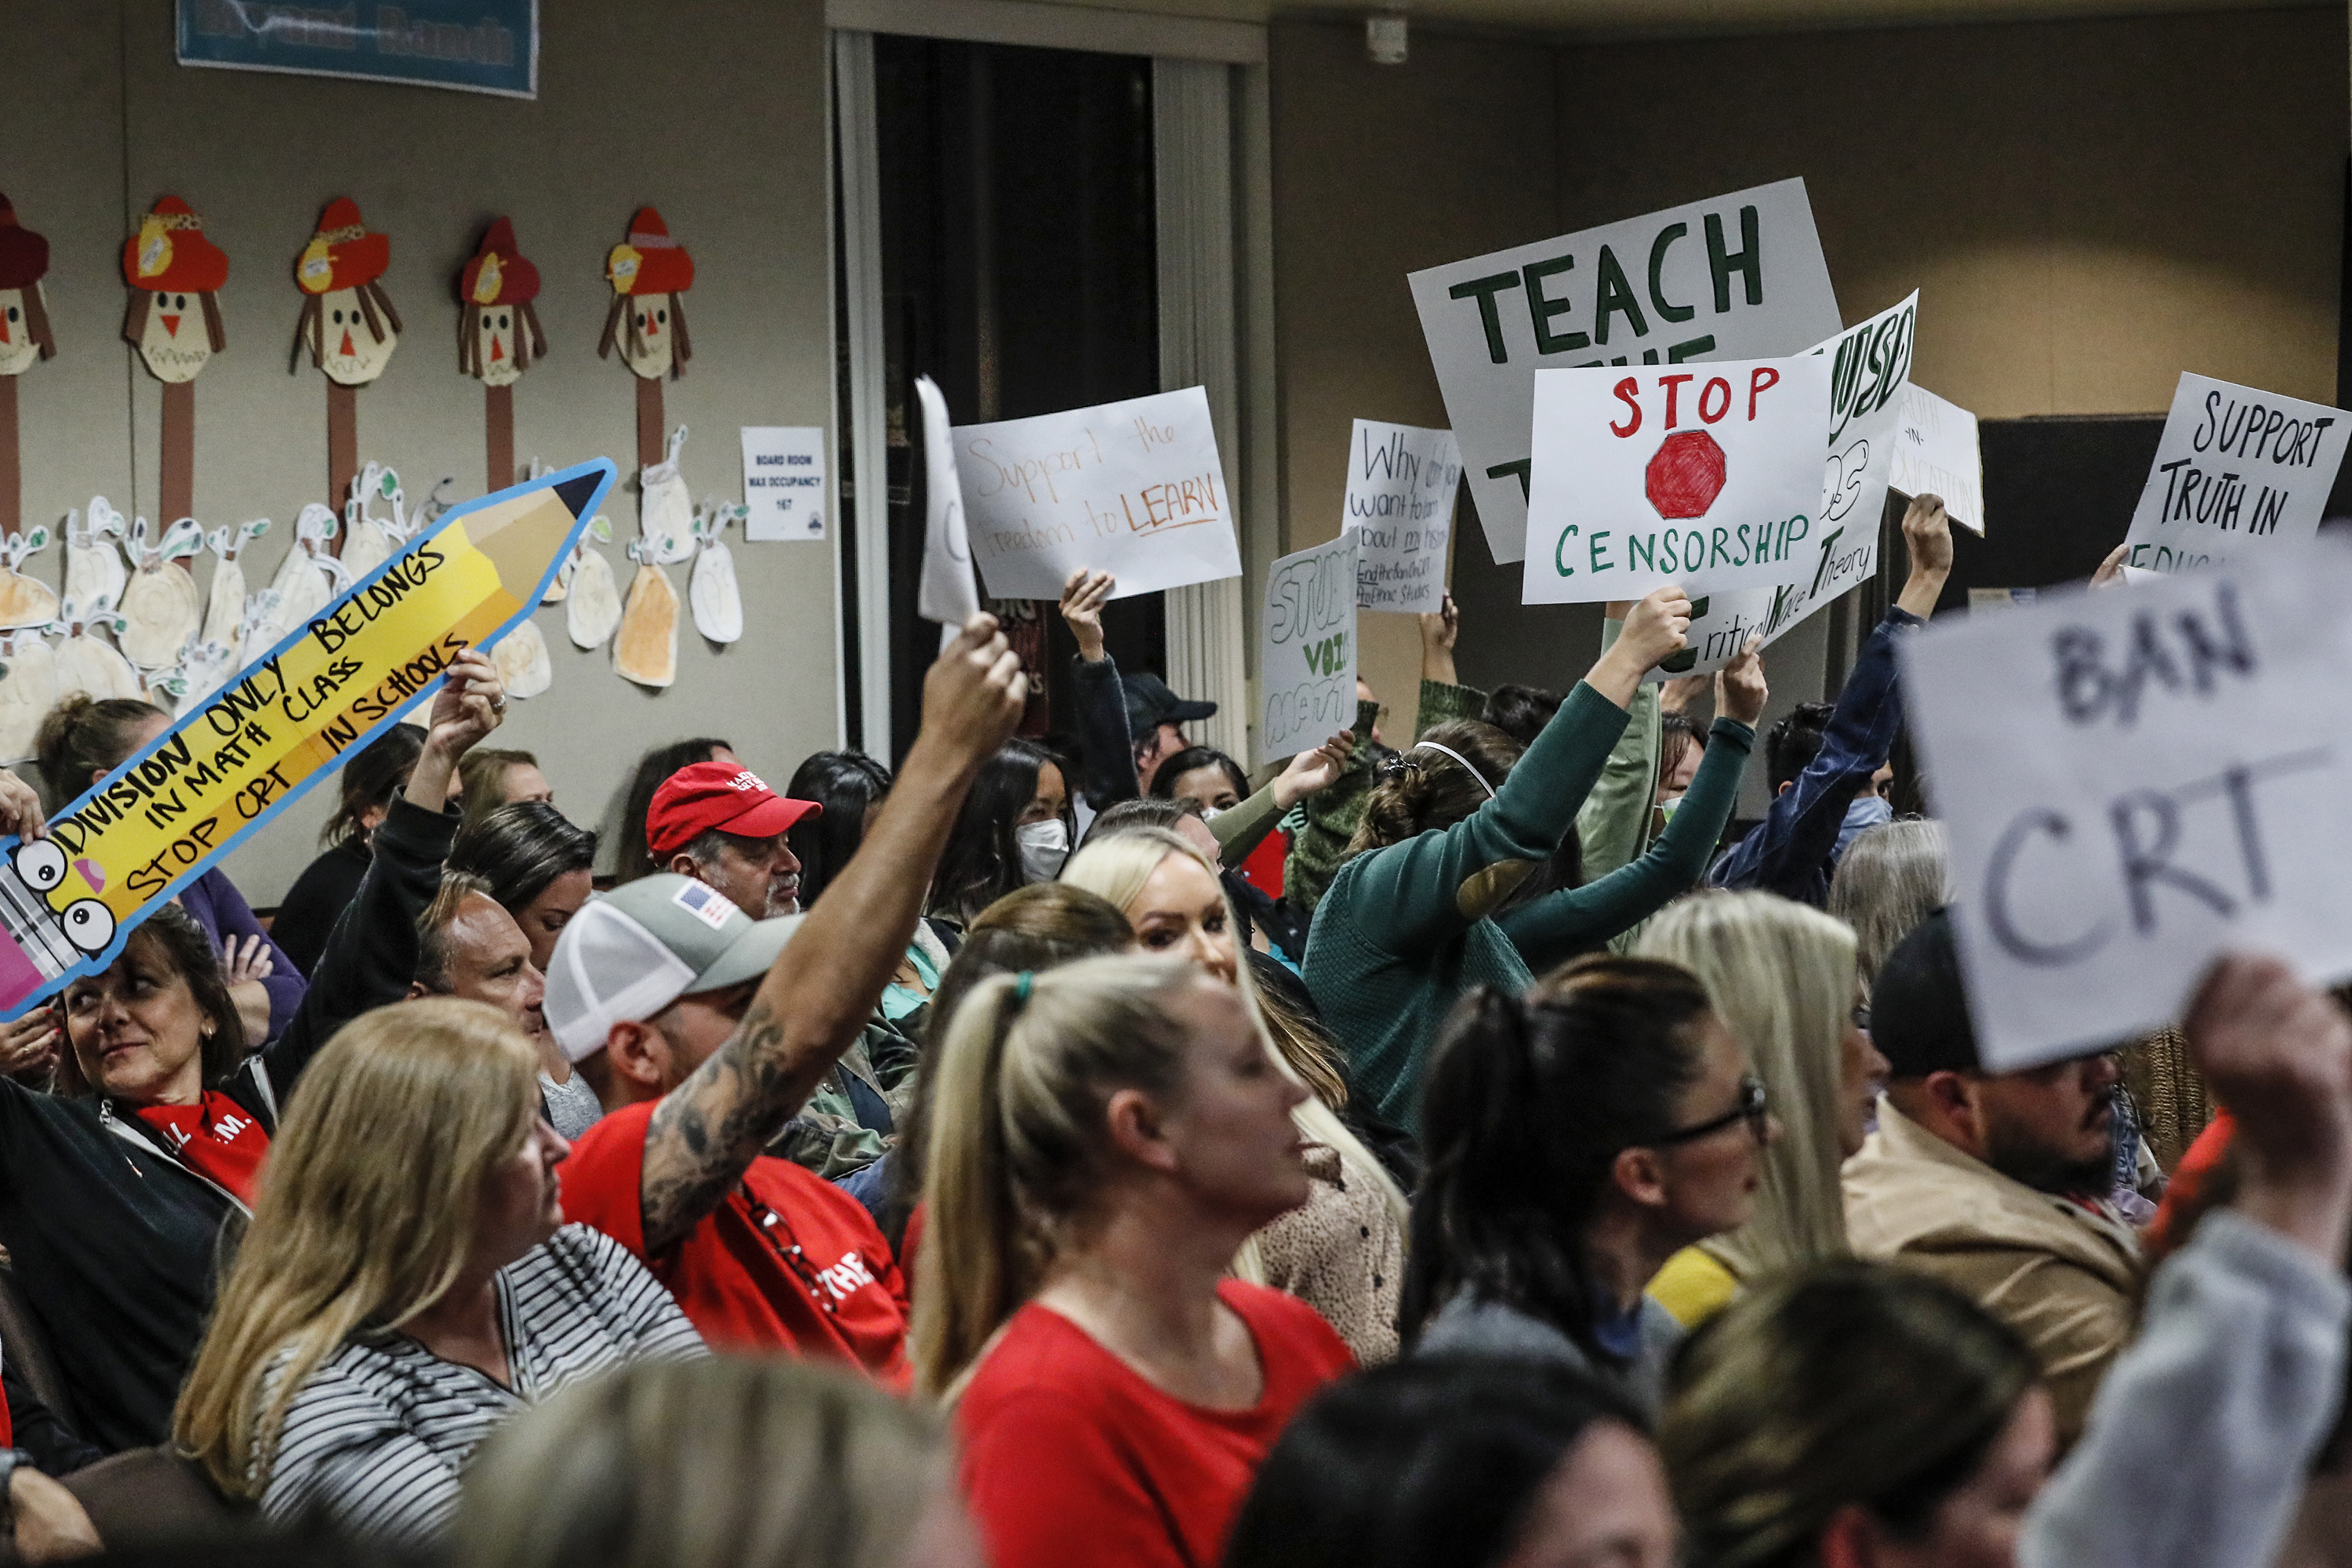 Supporters and opponents of teaching Critical Race Theory square off during a meeting of the Placentia-Yorba Linda, Calif., school district board on Nov. 16, 2021. (Robert Gauthier—Los Angeles Times/Getty Images)